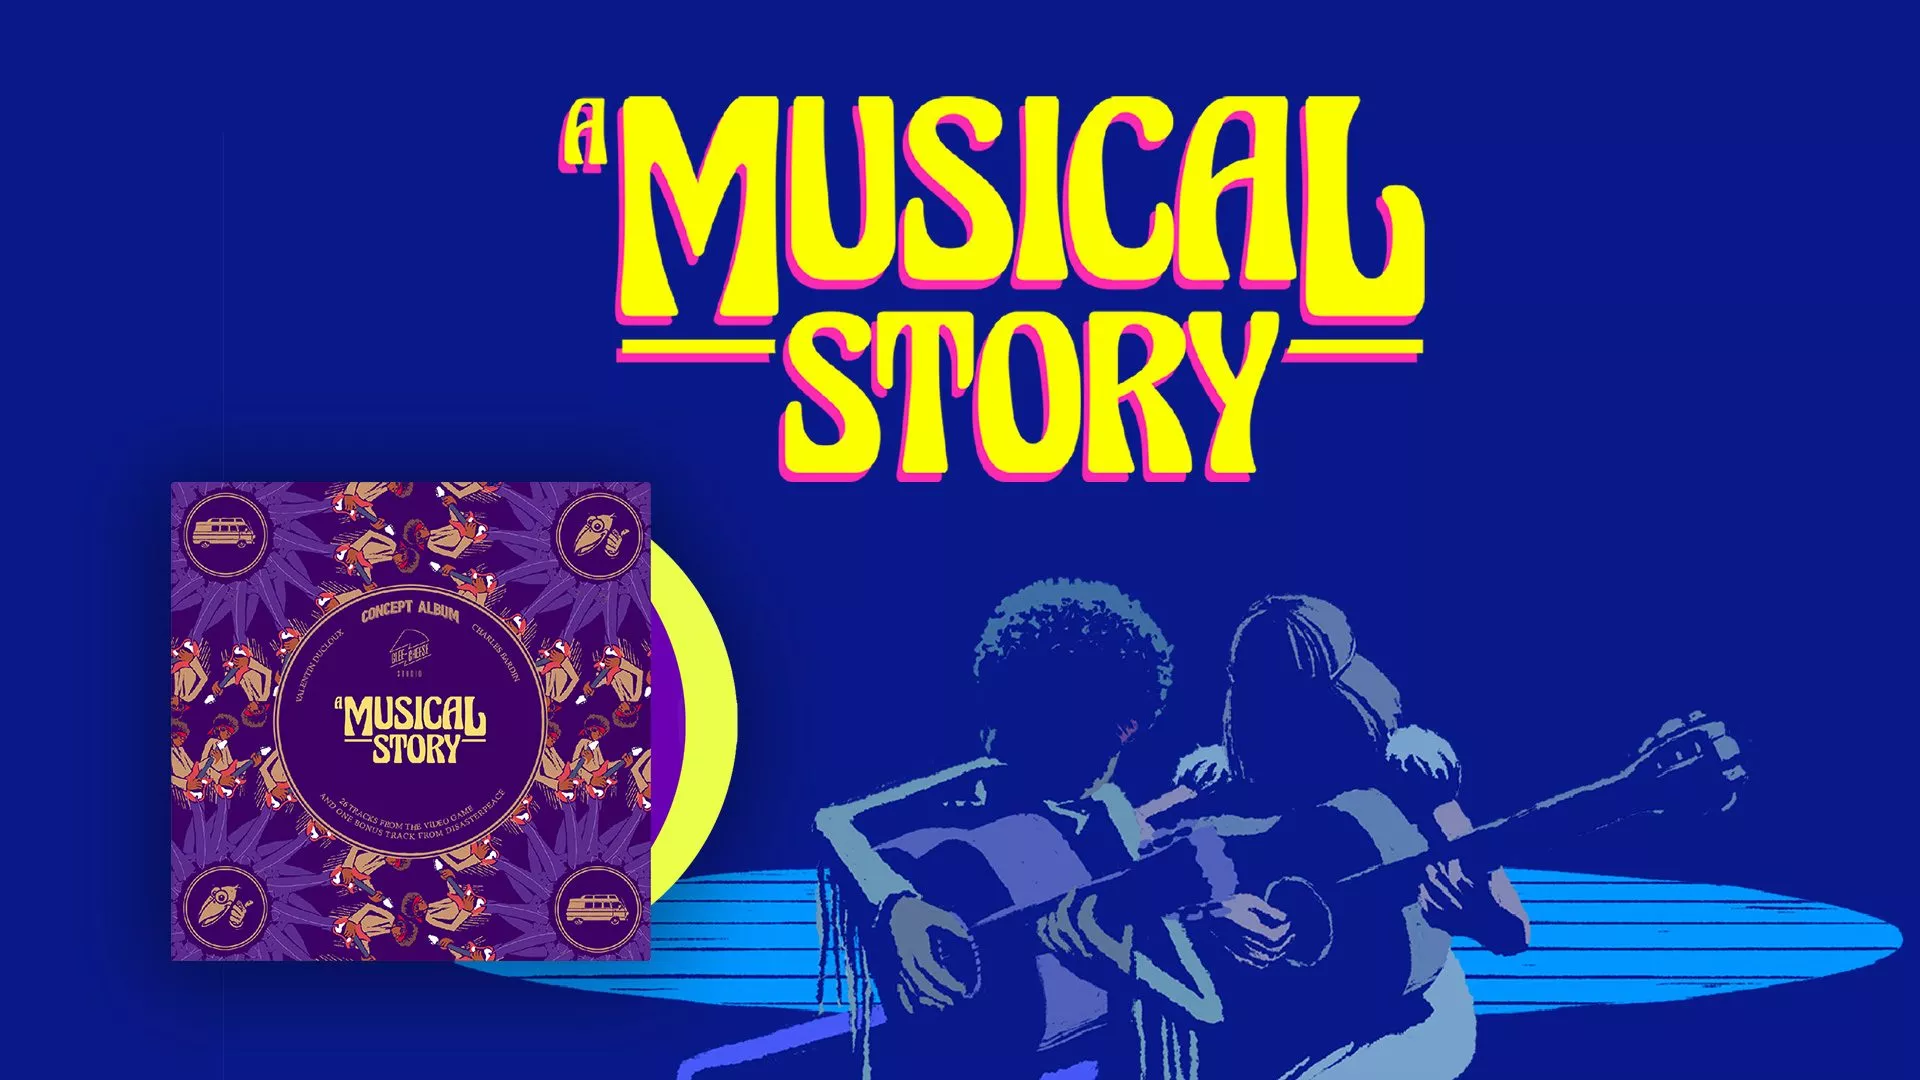 A musical story vinyle 3